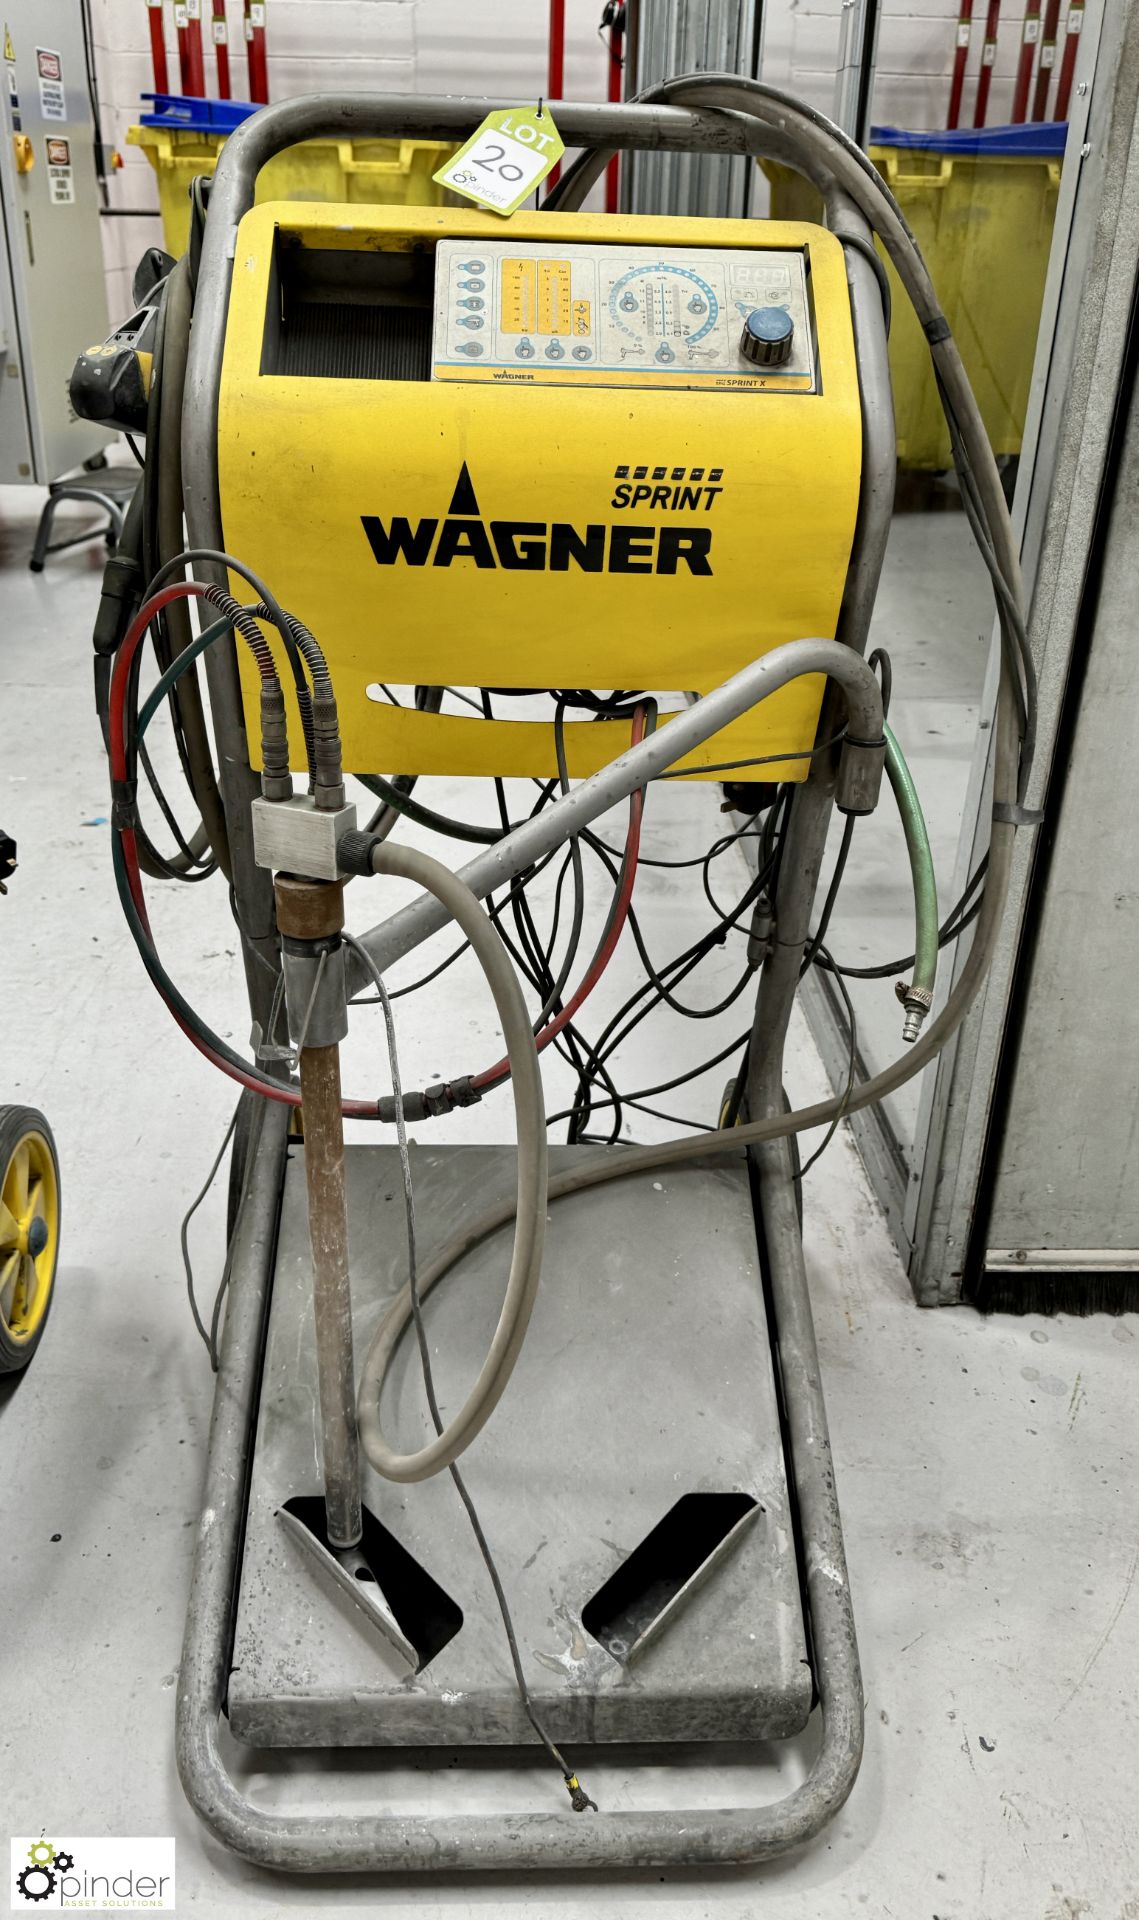 Wagner Sprint X Powder Coating Spray System, serial number 6838 - Image 2 of 10